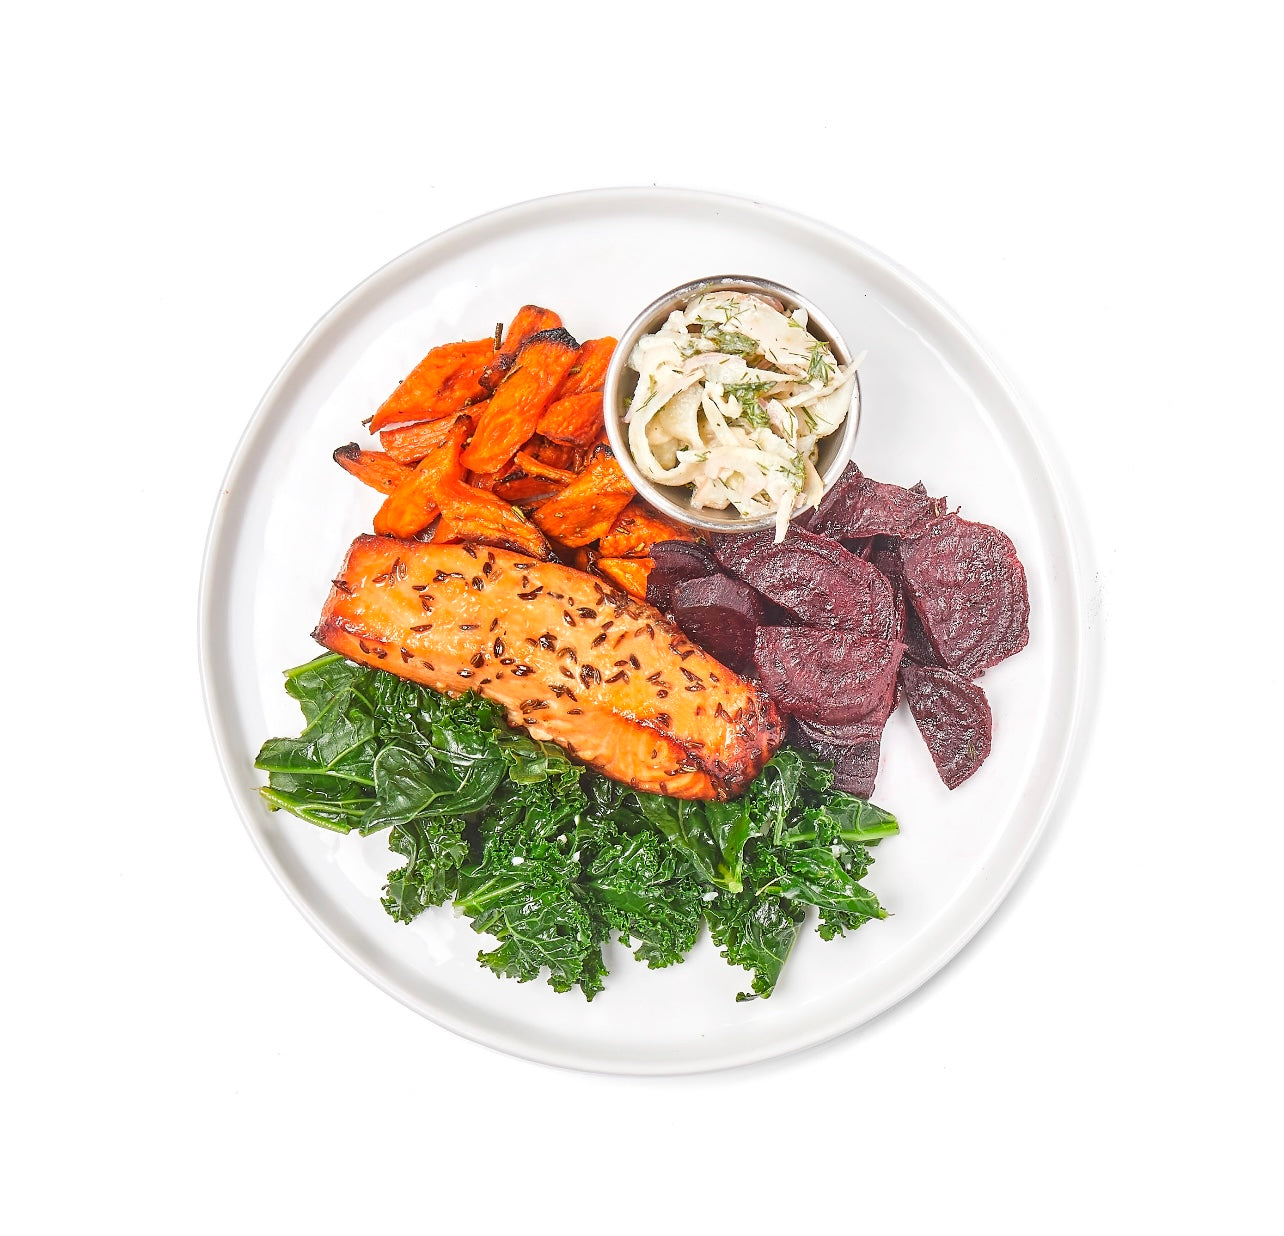 caraway glazed salmon azuluna foods Premium Pasture-Raised ready-to-eat Meals Delivery